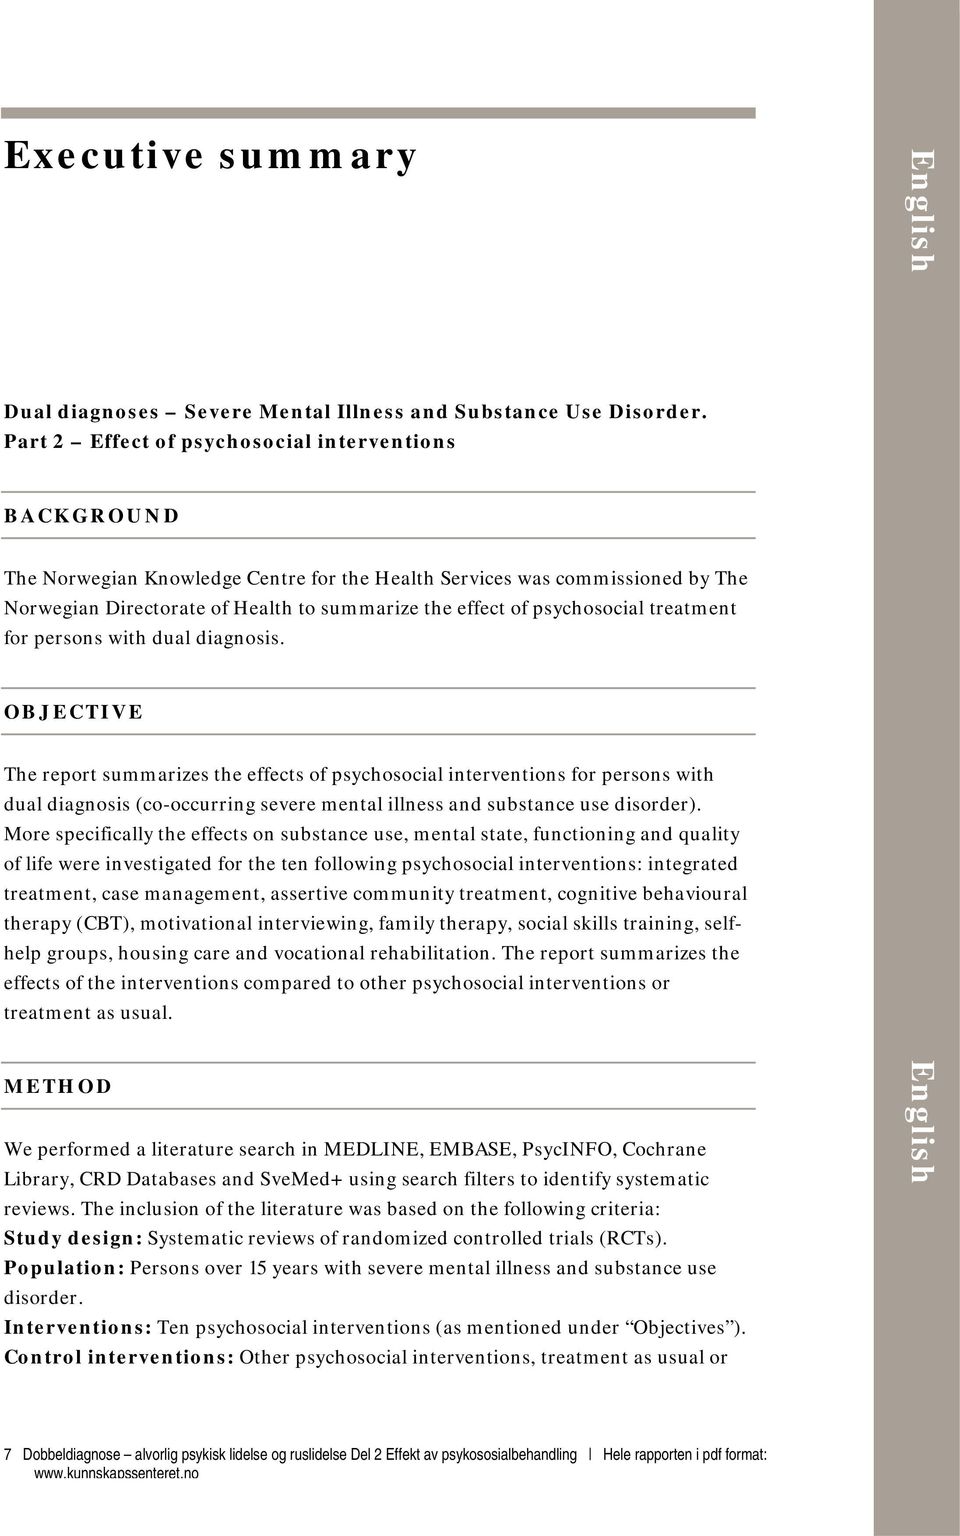 psychosocial treatment for persons with dual diagnosis.